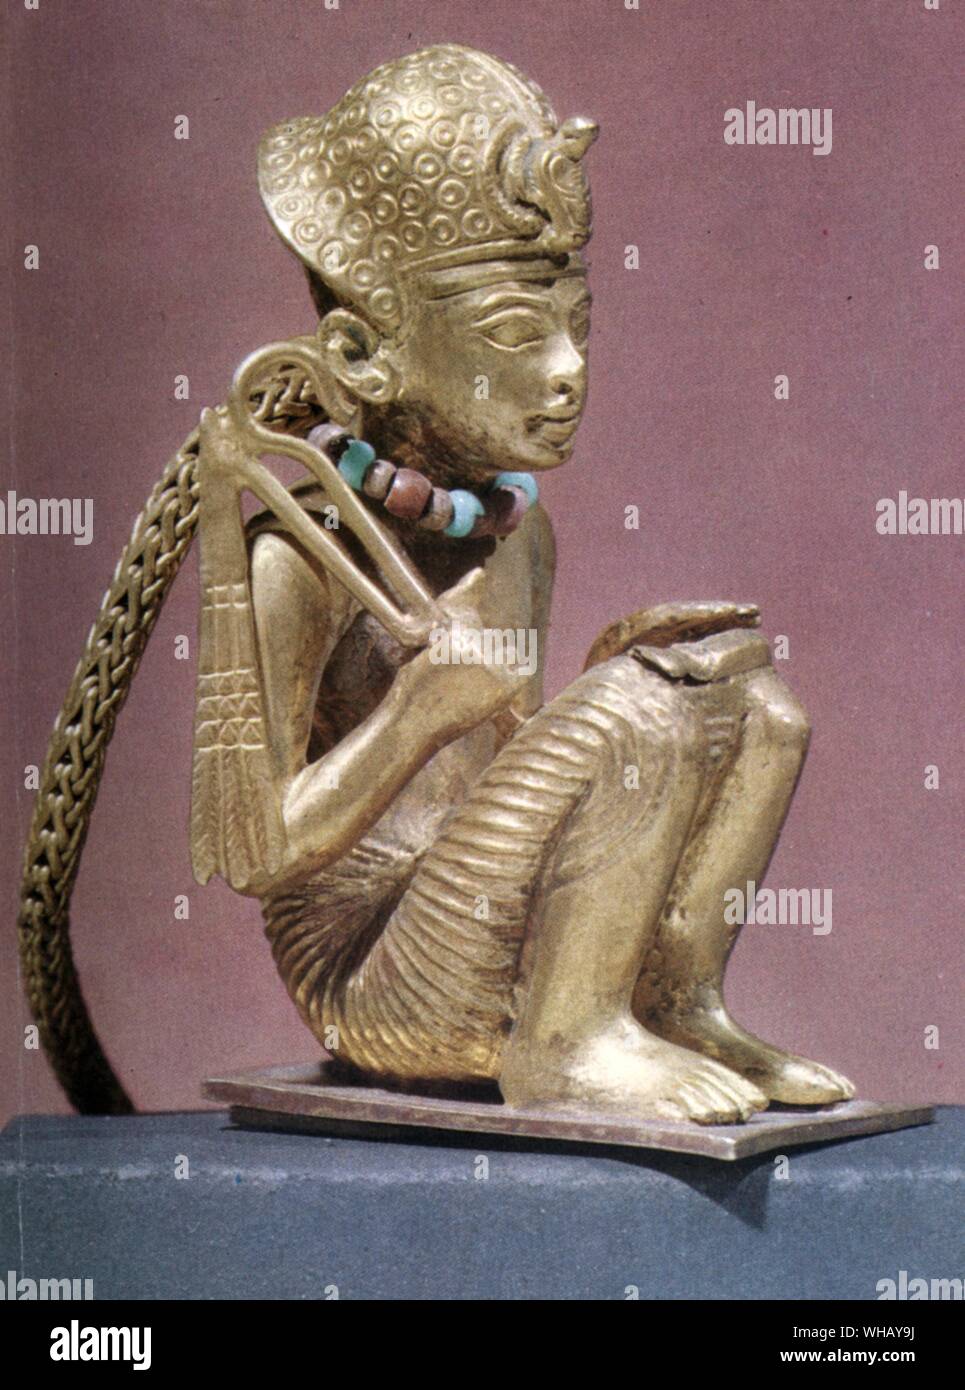 Tiny statuette of Amenophis III found in a small mummiform coffin. Solid Gold. Tukankhamen, by Christiane Desroches Noblecourt, page 23. Stock Photo